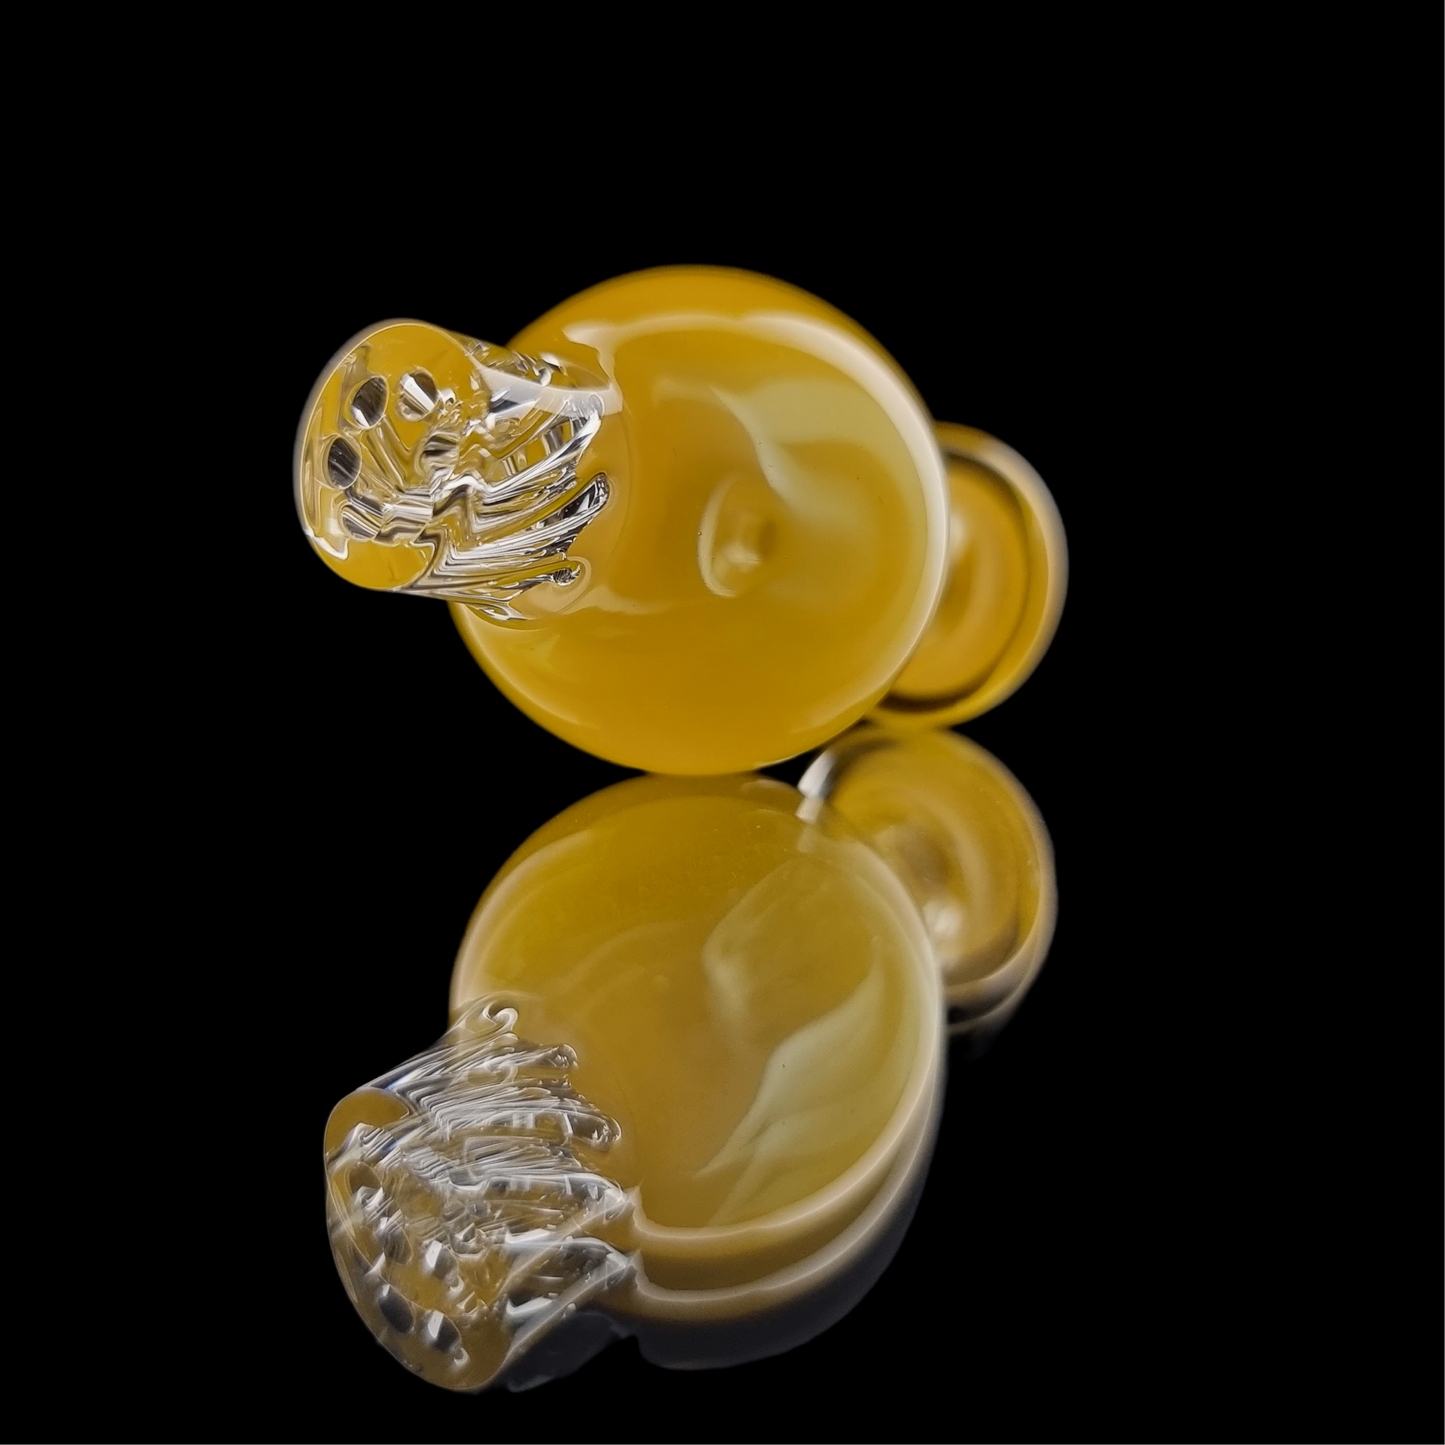 Ghosted Yellow Crayon Coloured OG Bubble Carb Cap by Gordo Scientific